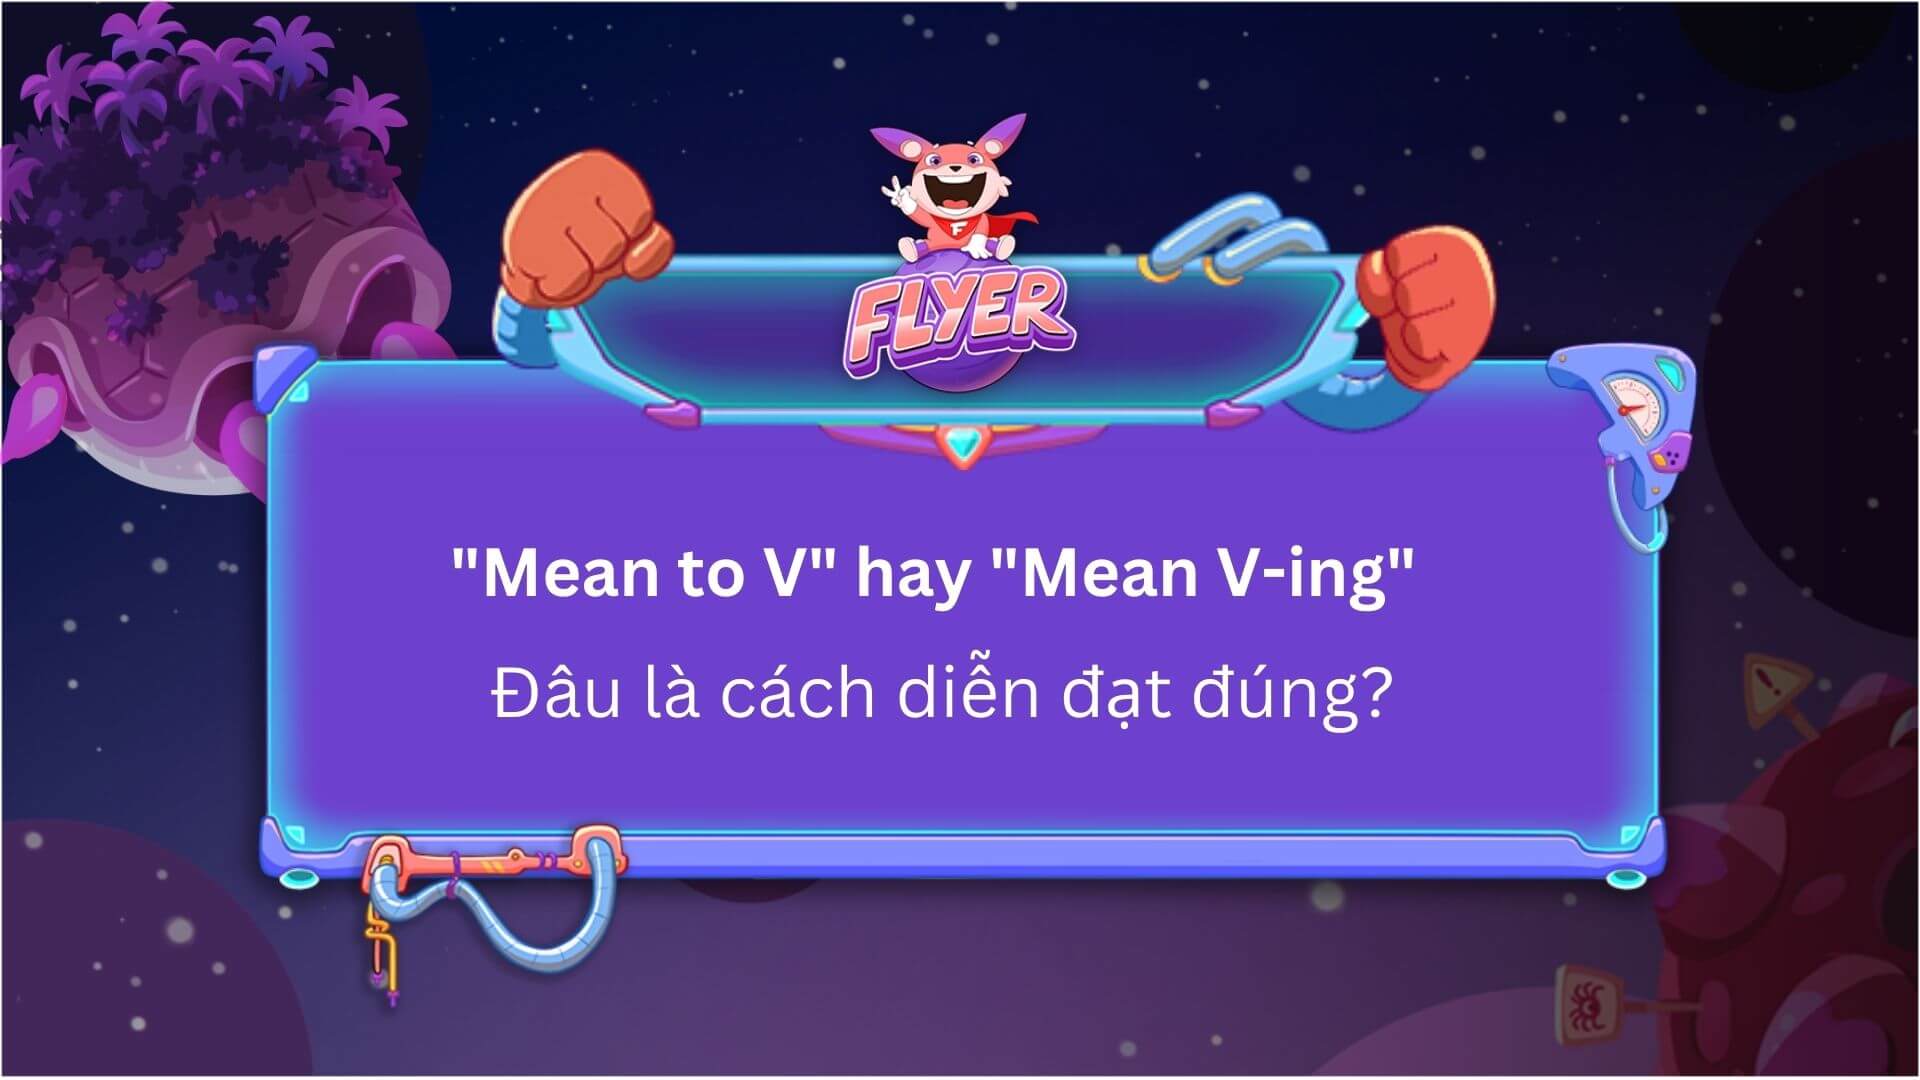 mean to v hay ving